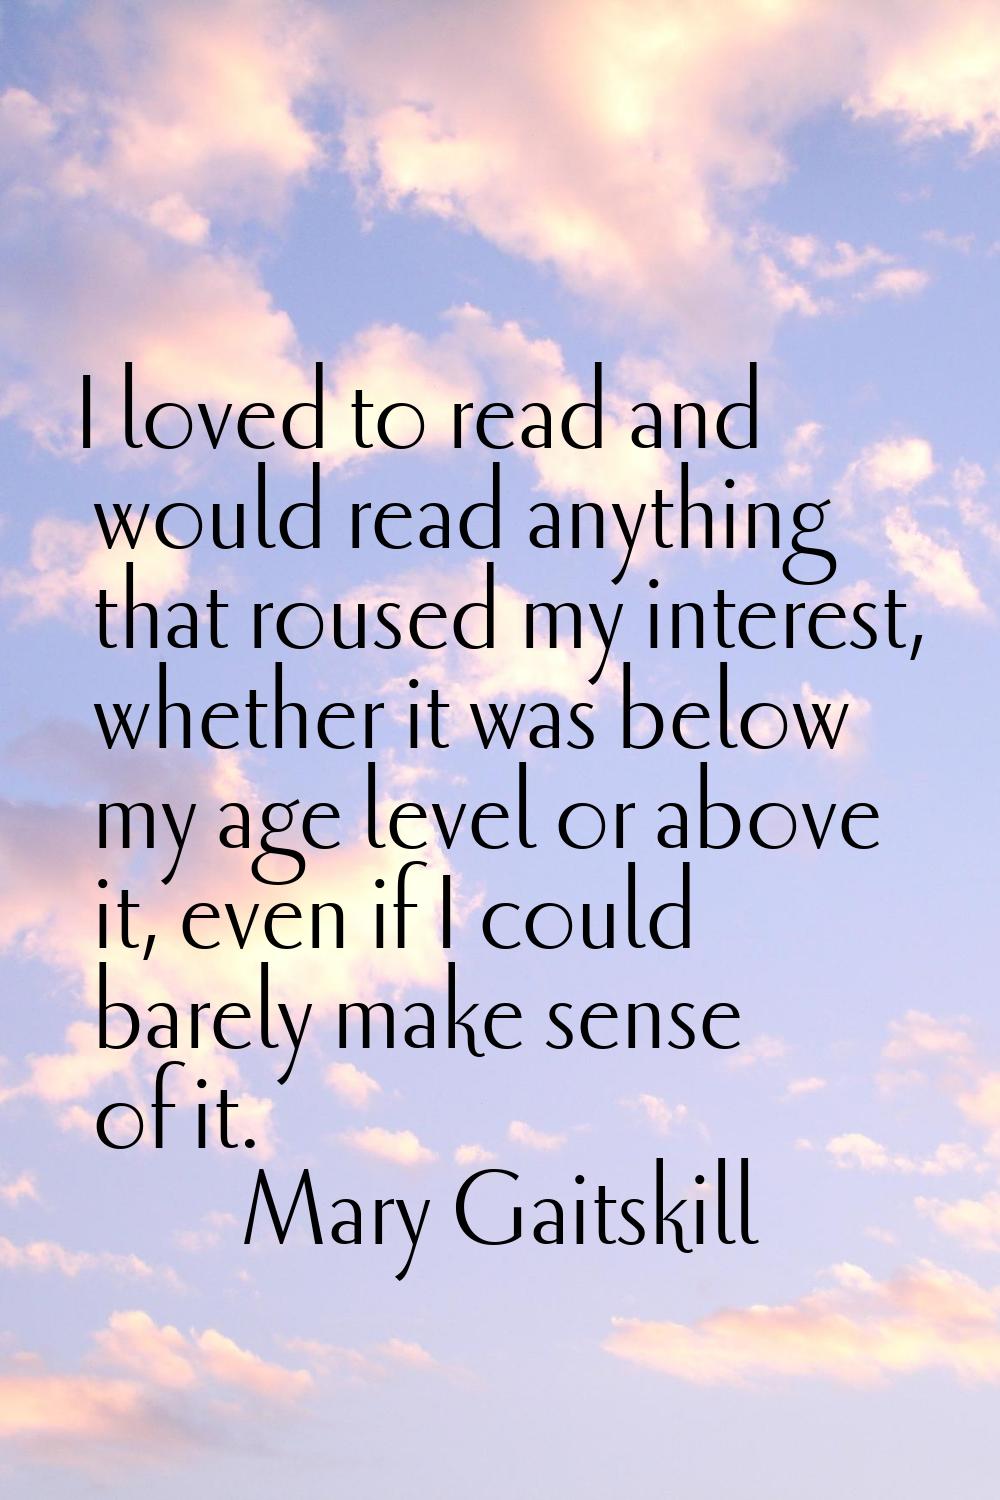 I loved to read and would read anything that roused my interest, whether it was below my age level 